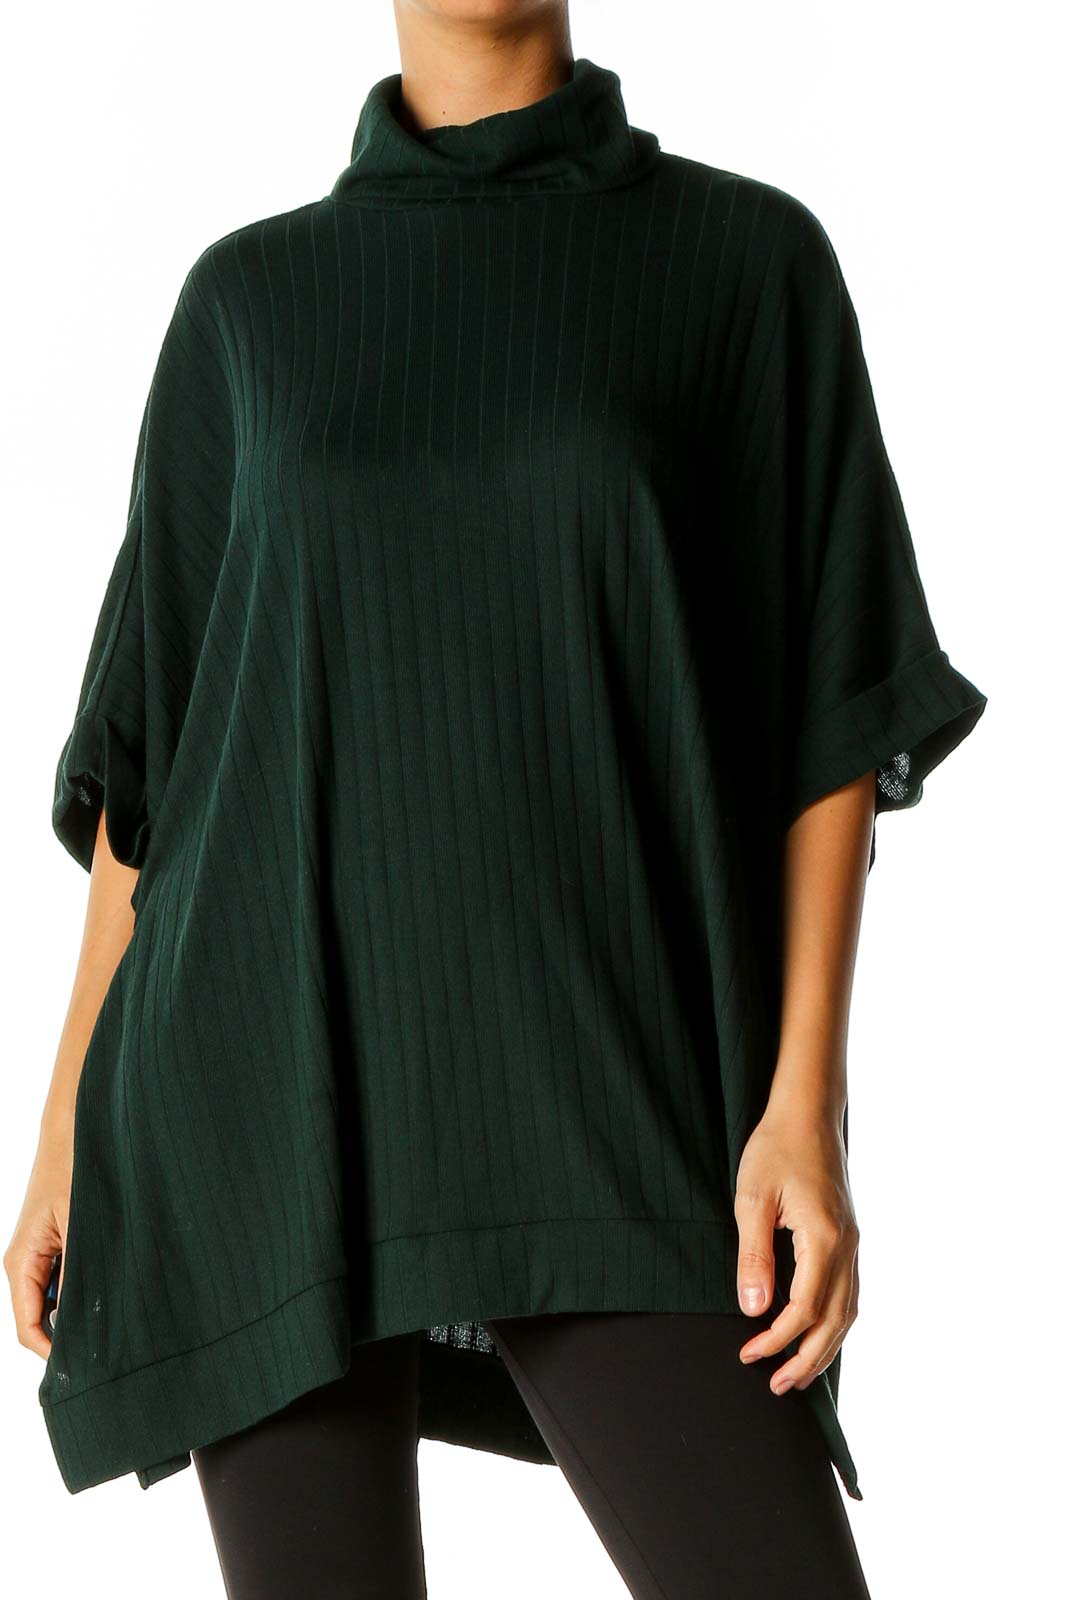 Green Solid Retro Sweater Front